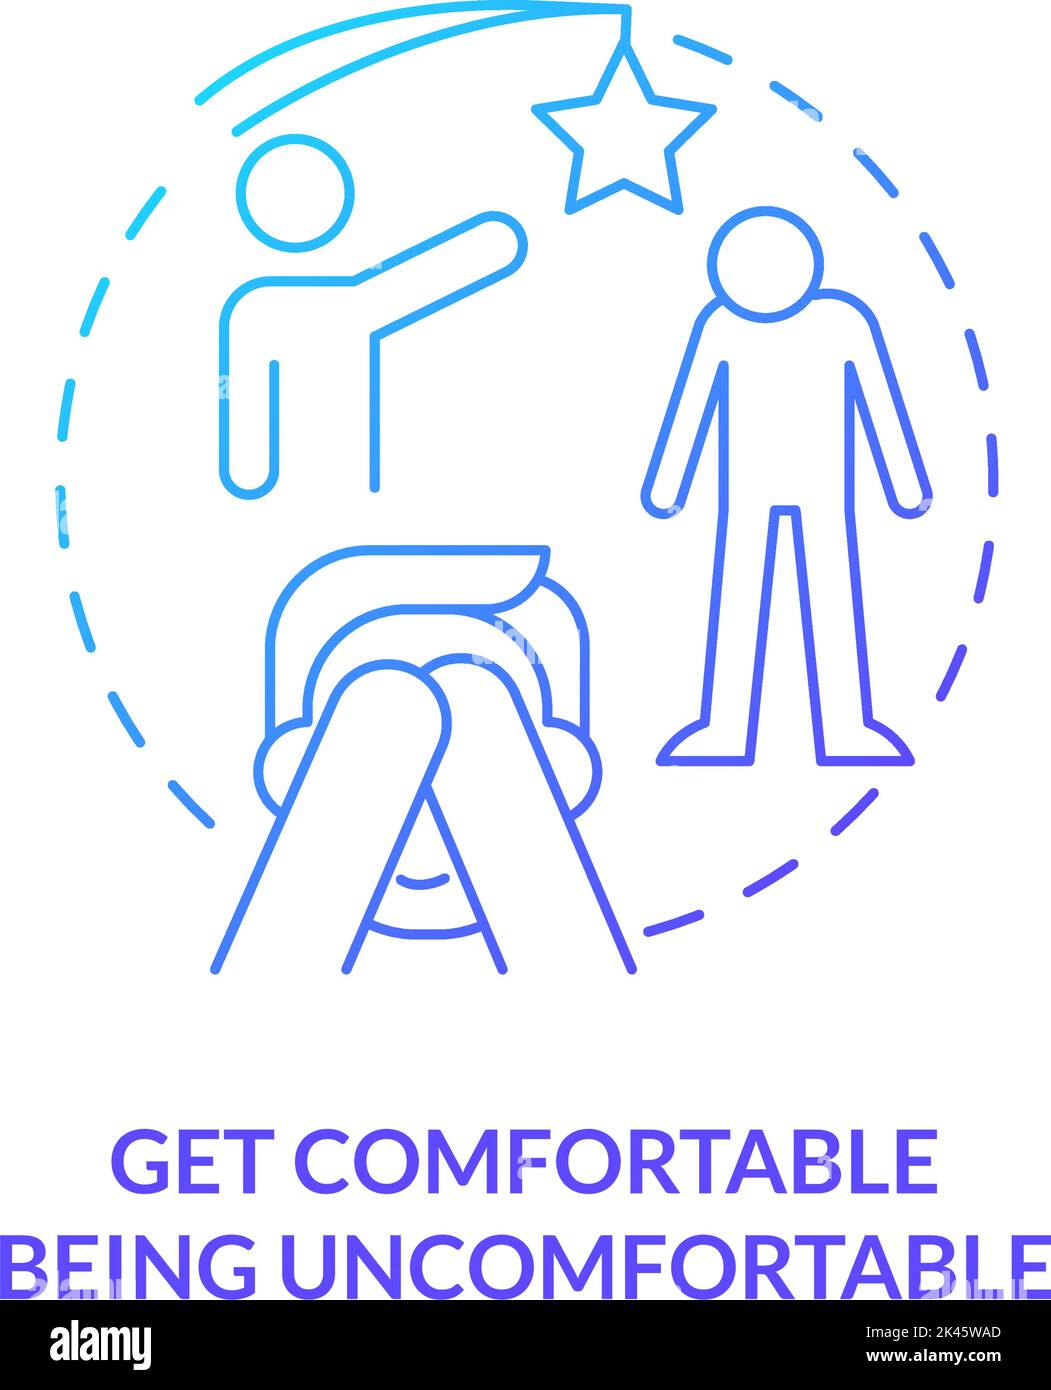 Get comfortable being uncomfortable blue gradient concept icon Stock Vector